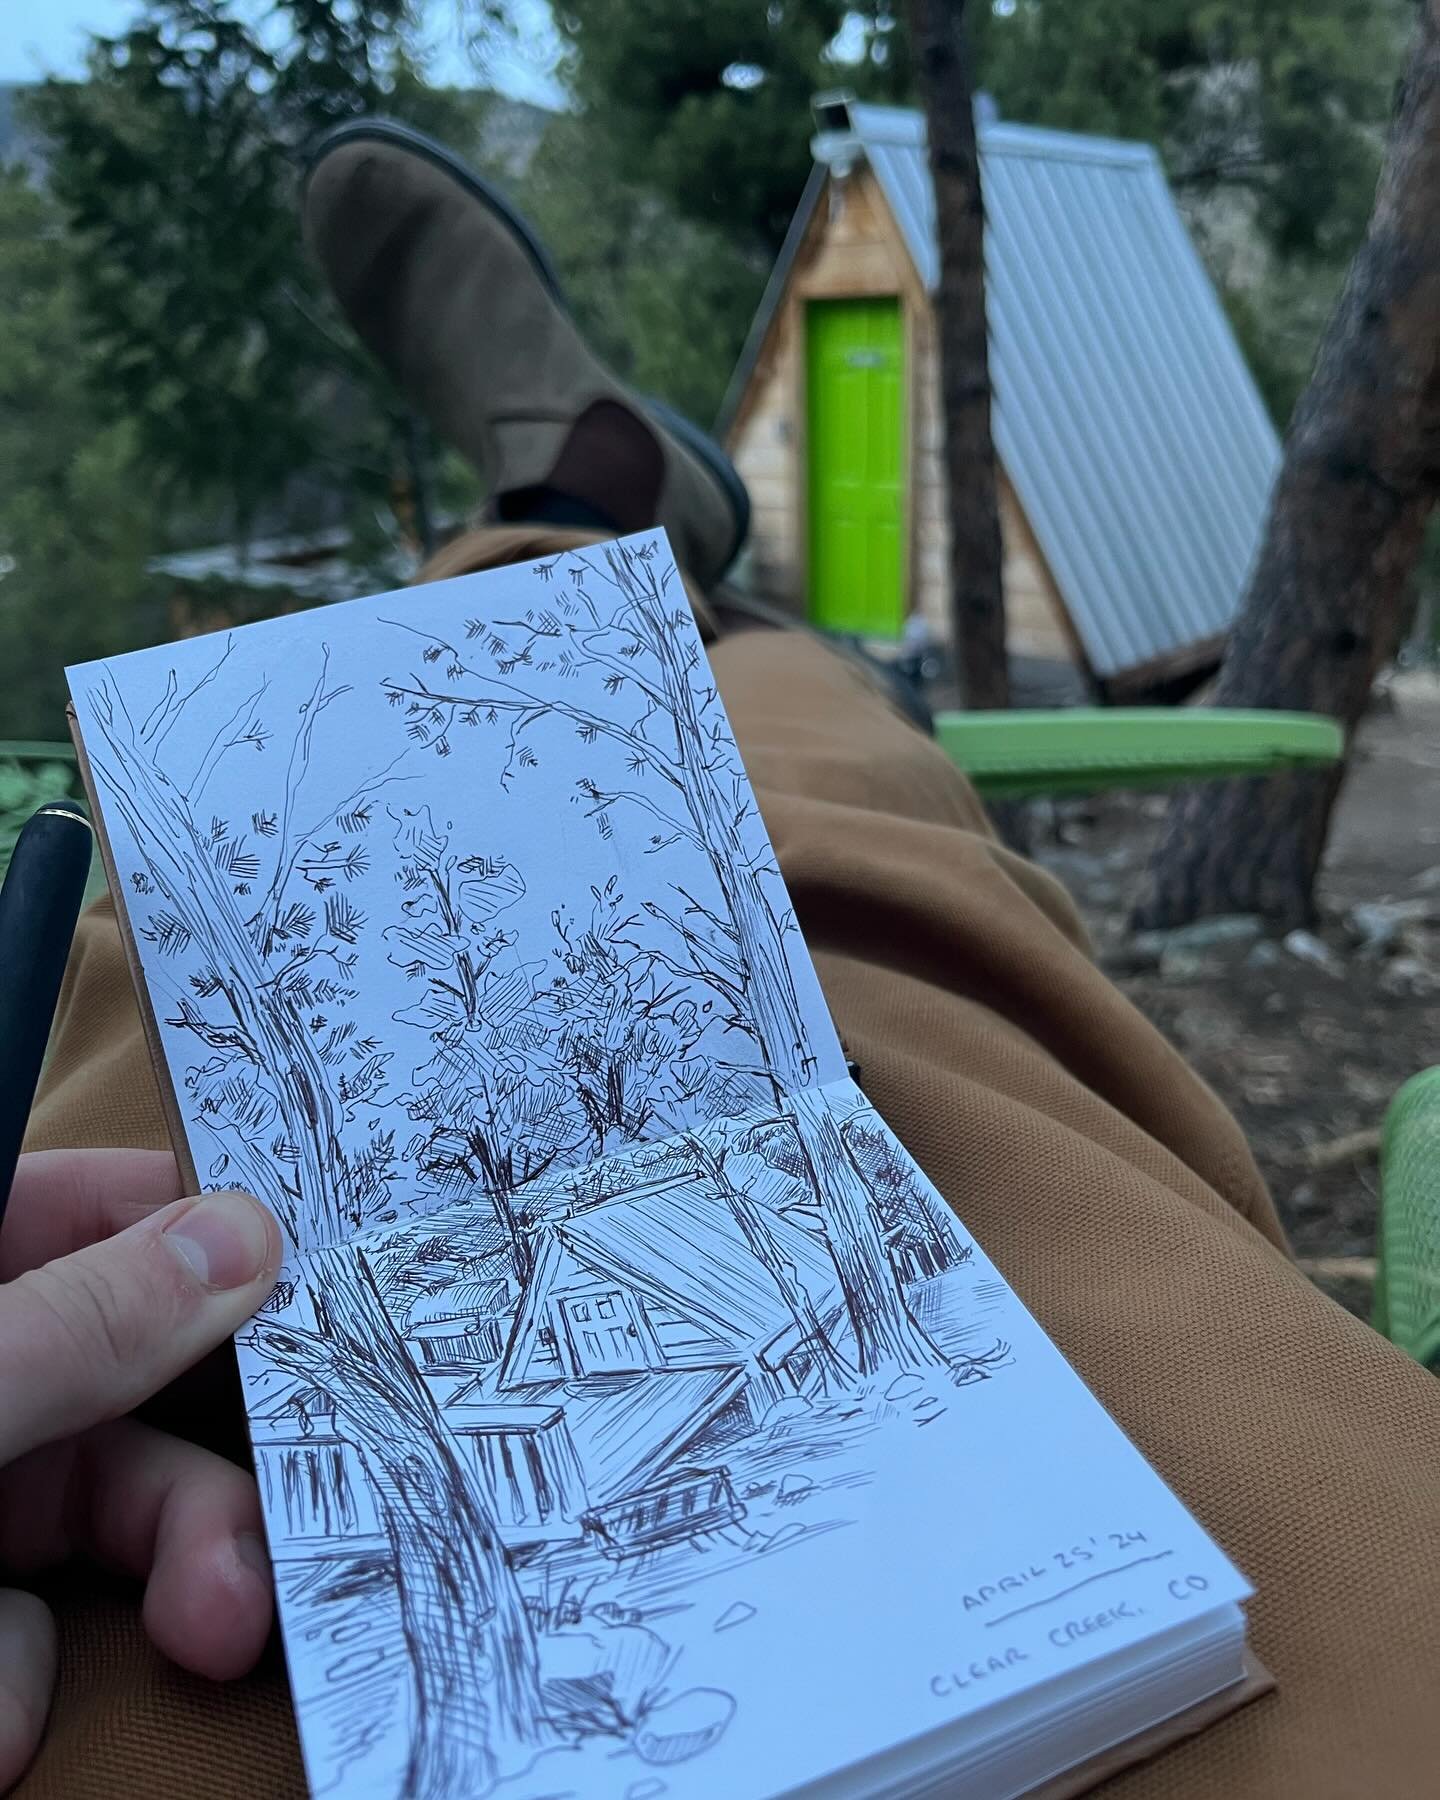 Some daily sketching on a mountain get-a-way 🏔️🌲🌿
&bull;
#wolfedesigns #landscape #drawingeveryday #dumontcolorado #clearcreek #natureart